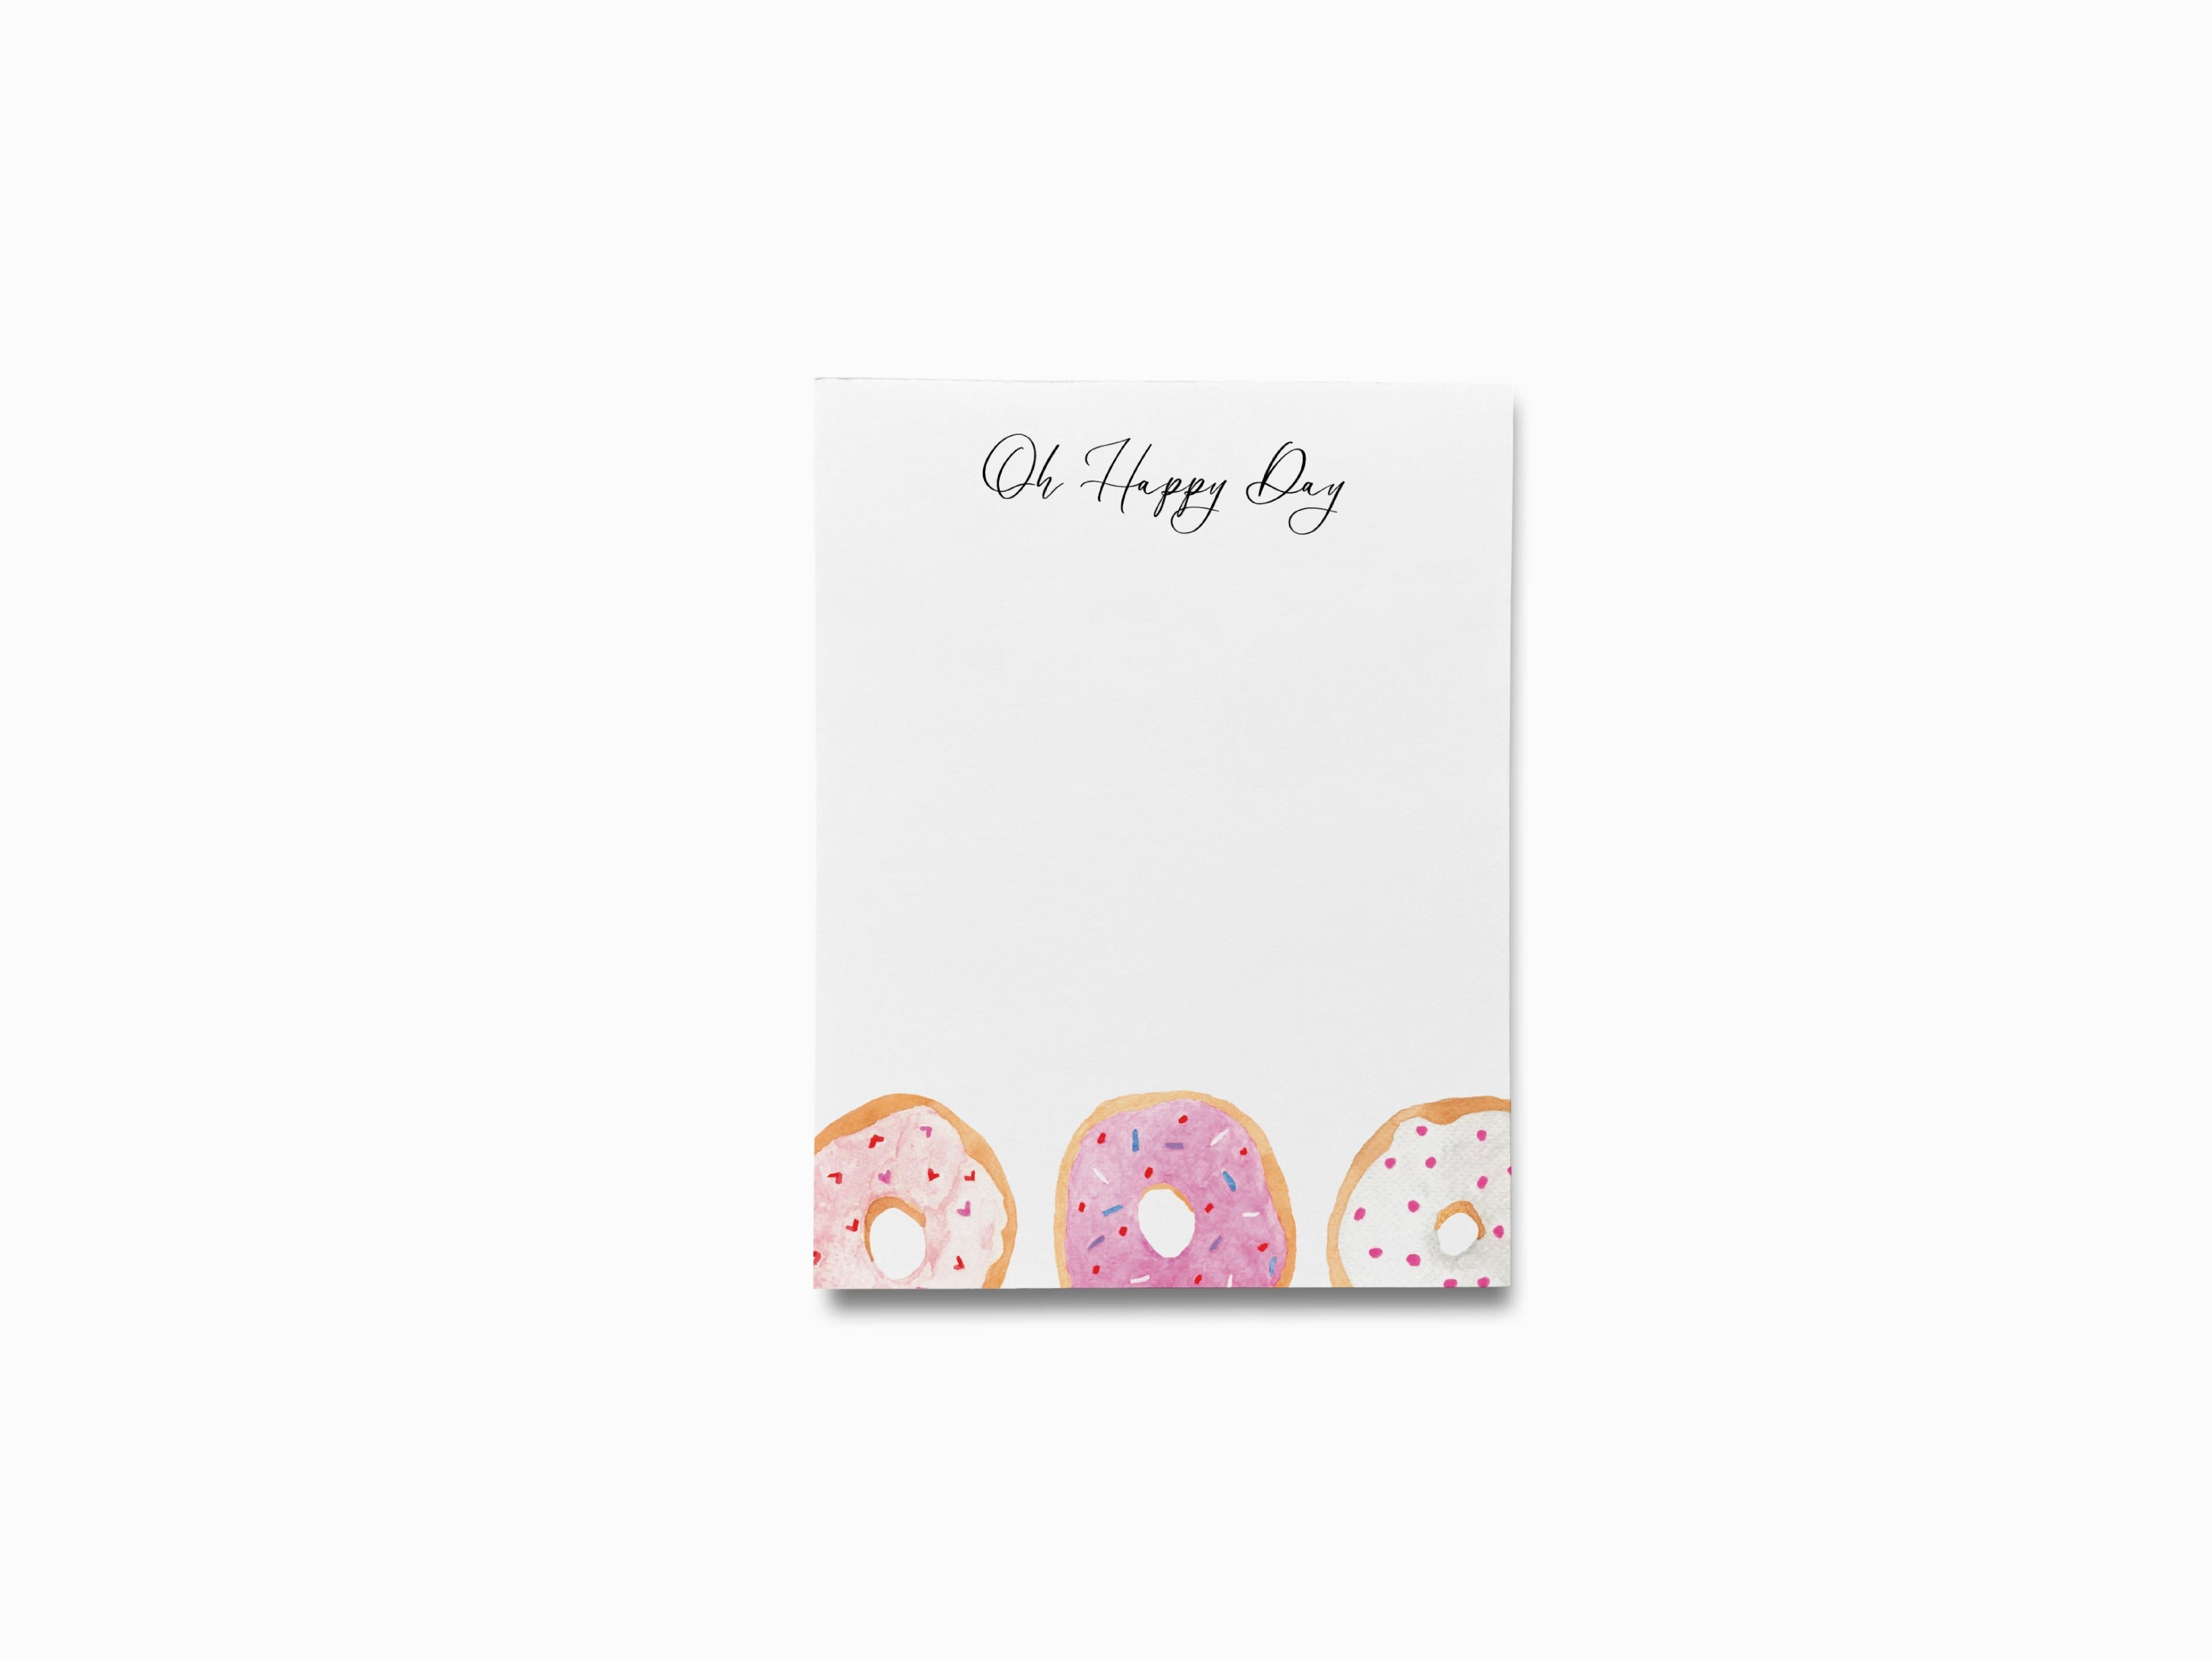 Donut Notepad-These notepads feature our hand-painted watercolor donuts, printed in the USA on a beautiful smooth stock. You choose which size you want (or bundled together for a beautiful gift set) and makes a great gift for the checklist and sweet tooth lover in your life.-The Singing Little Bird